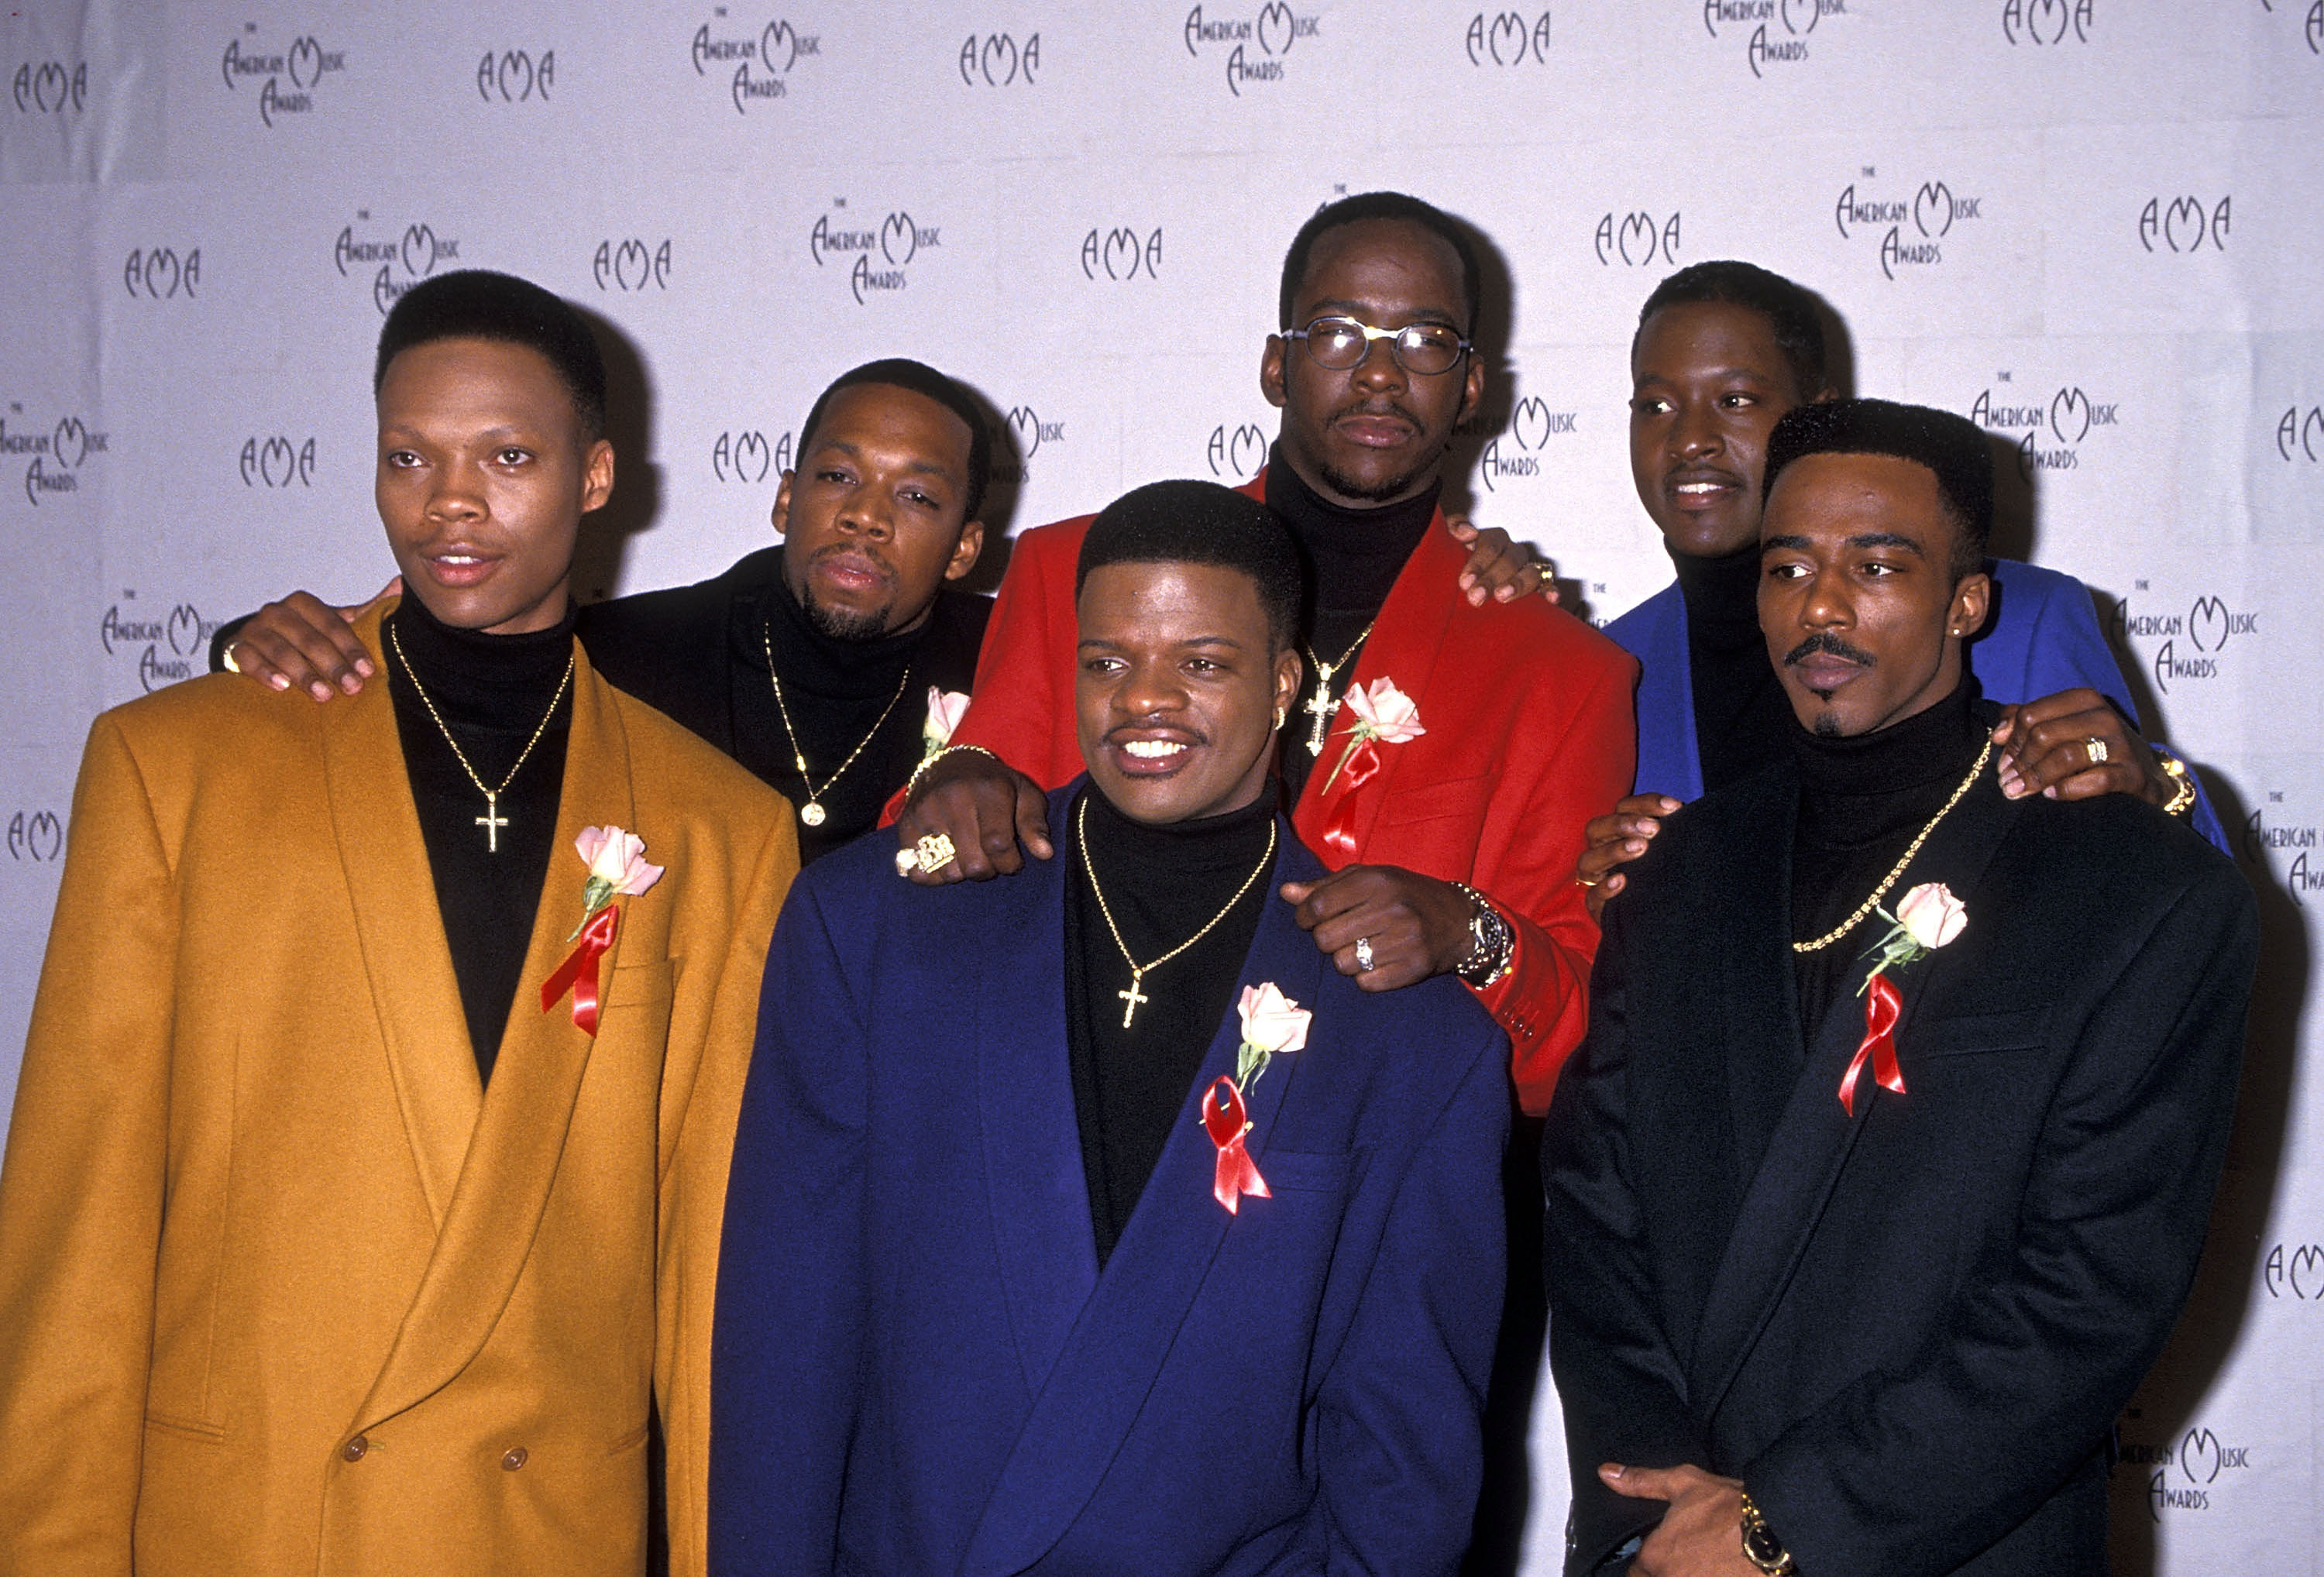 Here’s Actual Footage Of Moments From Part 3 Of New Edition’s Biopic